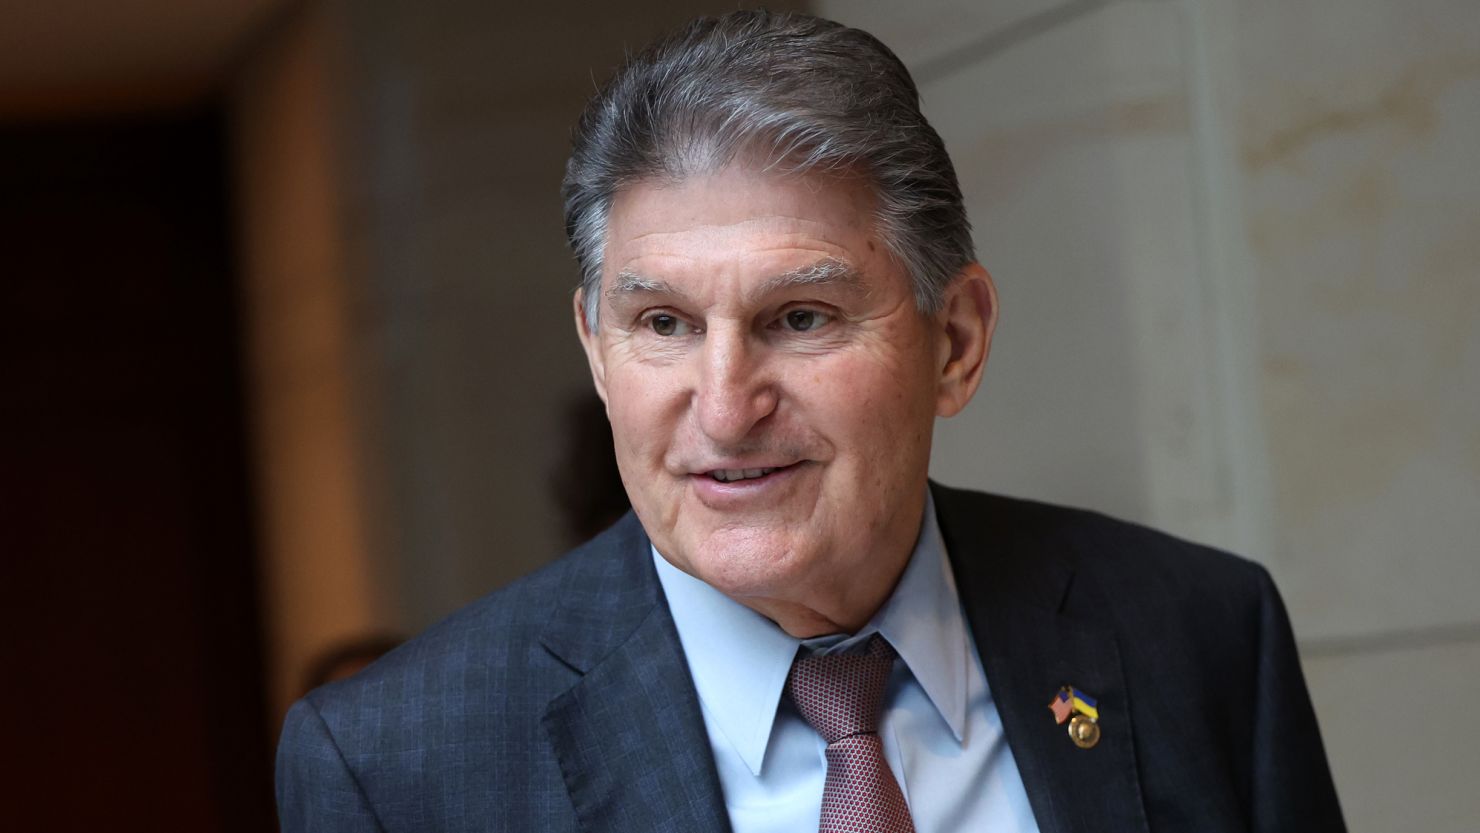 WASHINGTON, DC - FEBRUARY 15: U.S. Sen. Joe Manchin (D-WV) arrives for a Senate briefing on China at the U.S Capitol on February 15, 2023 in Washington, DC. Members of the Biden administration, including representatives from the Defense Department, briefed Senators on China and the recent suspected spy balloon that was shot down. (Photo by Kevin Dietsch/Getty Images)